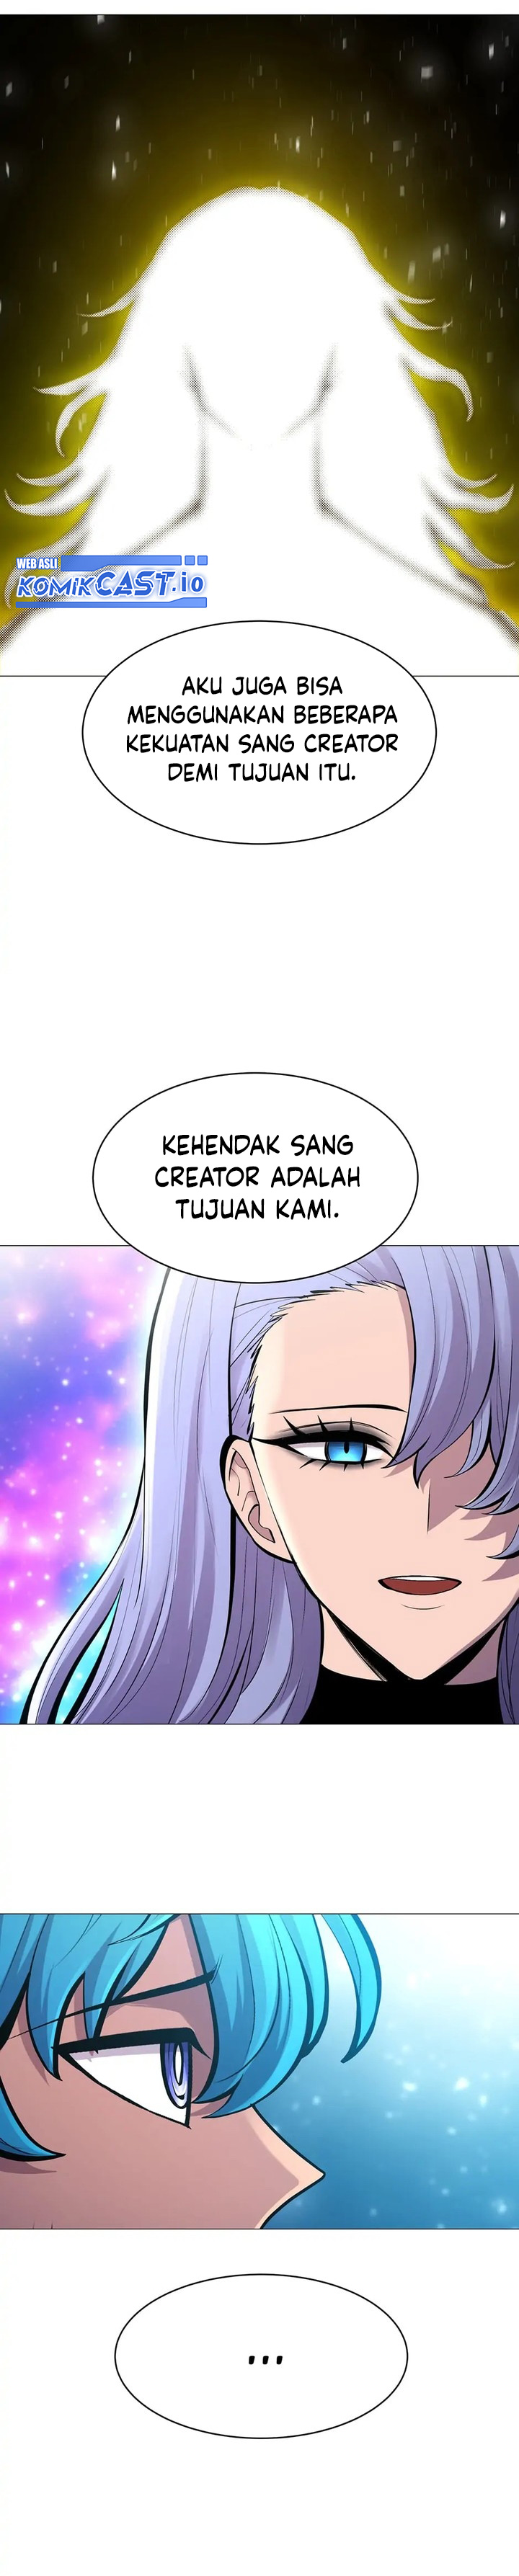 Updater Chapter 104